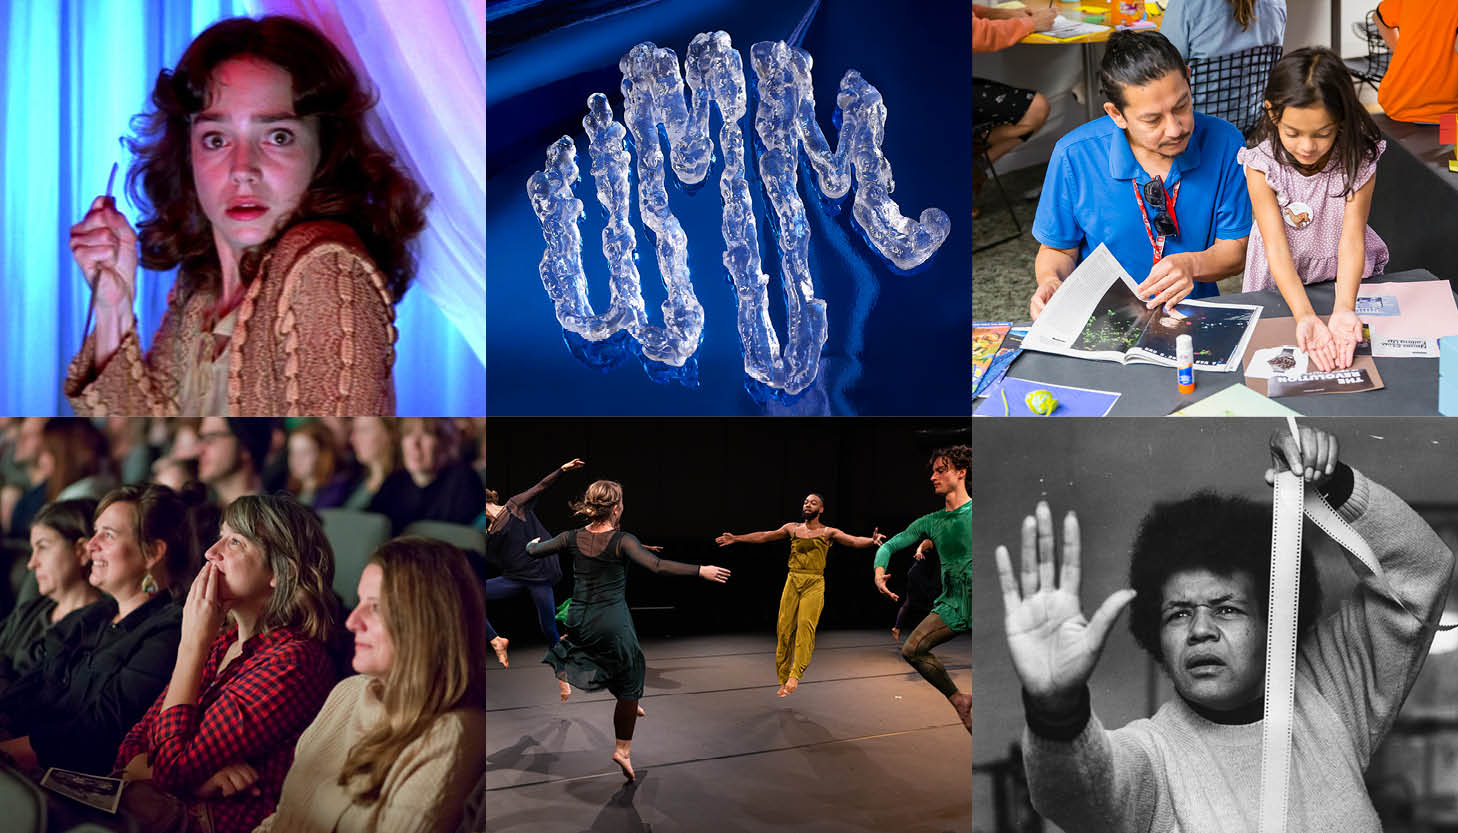 A collage of six images reflecting a range of events coming to the Wexner Center for the Arts in 2023 and 2024